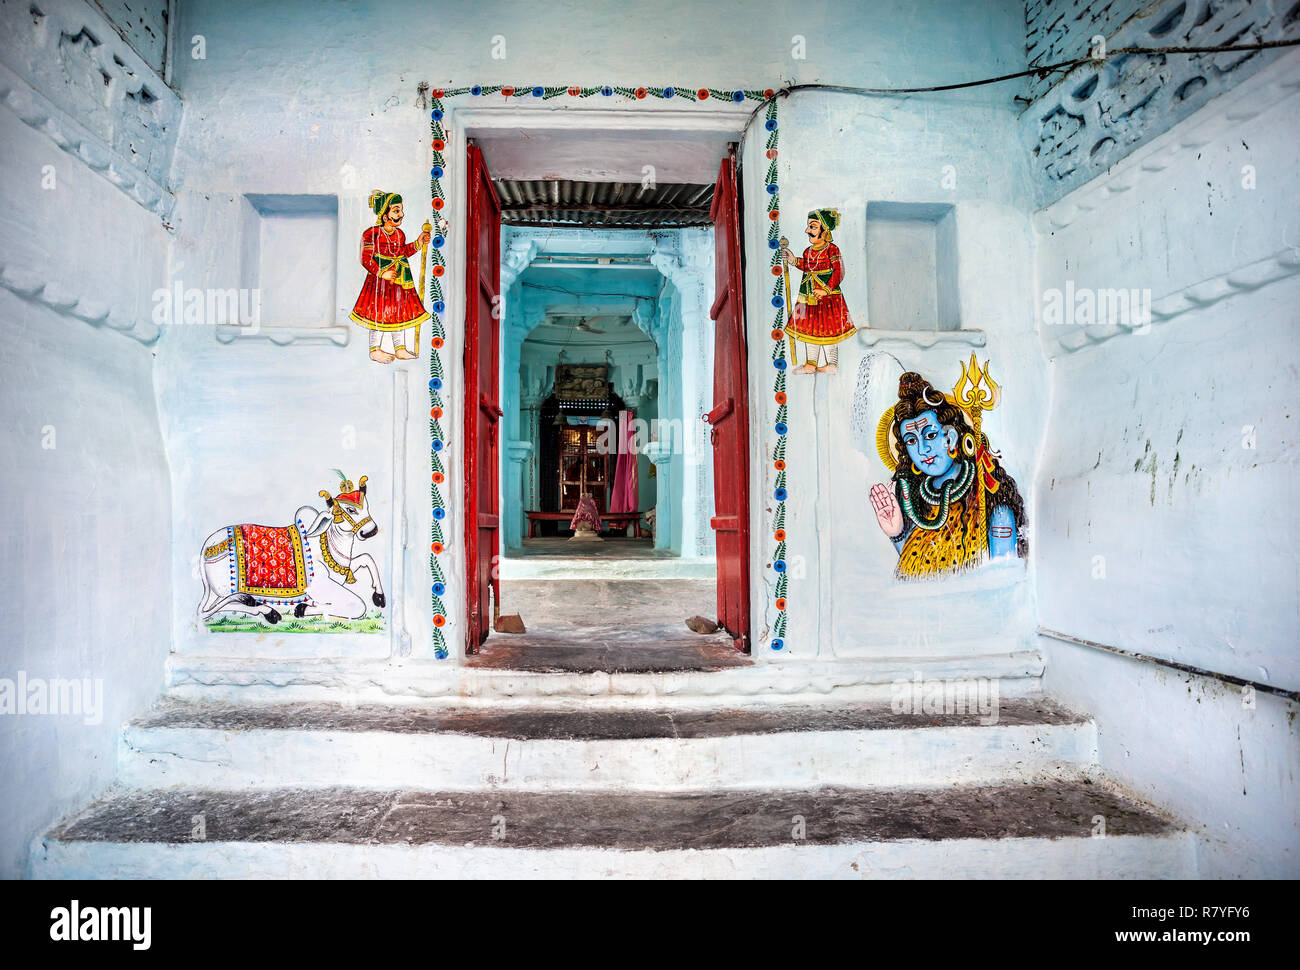 Traditional Rajasthan paintings on the Hindu temple wall in Udaipur, Rajasthan, India Stock Photo